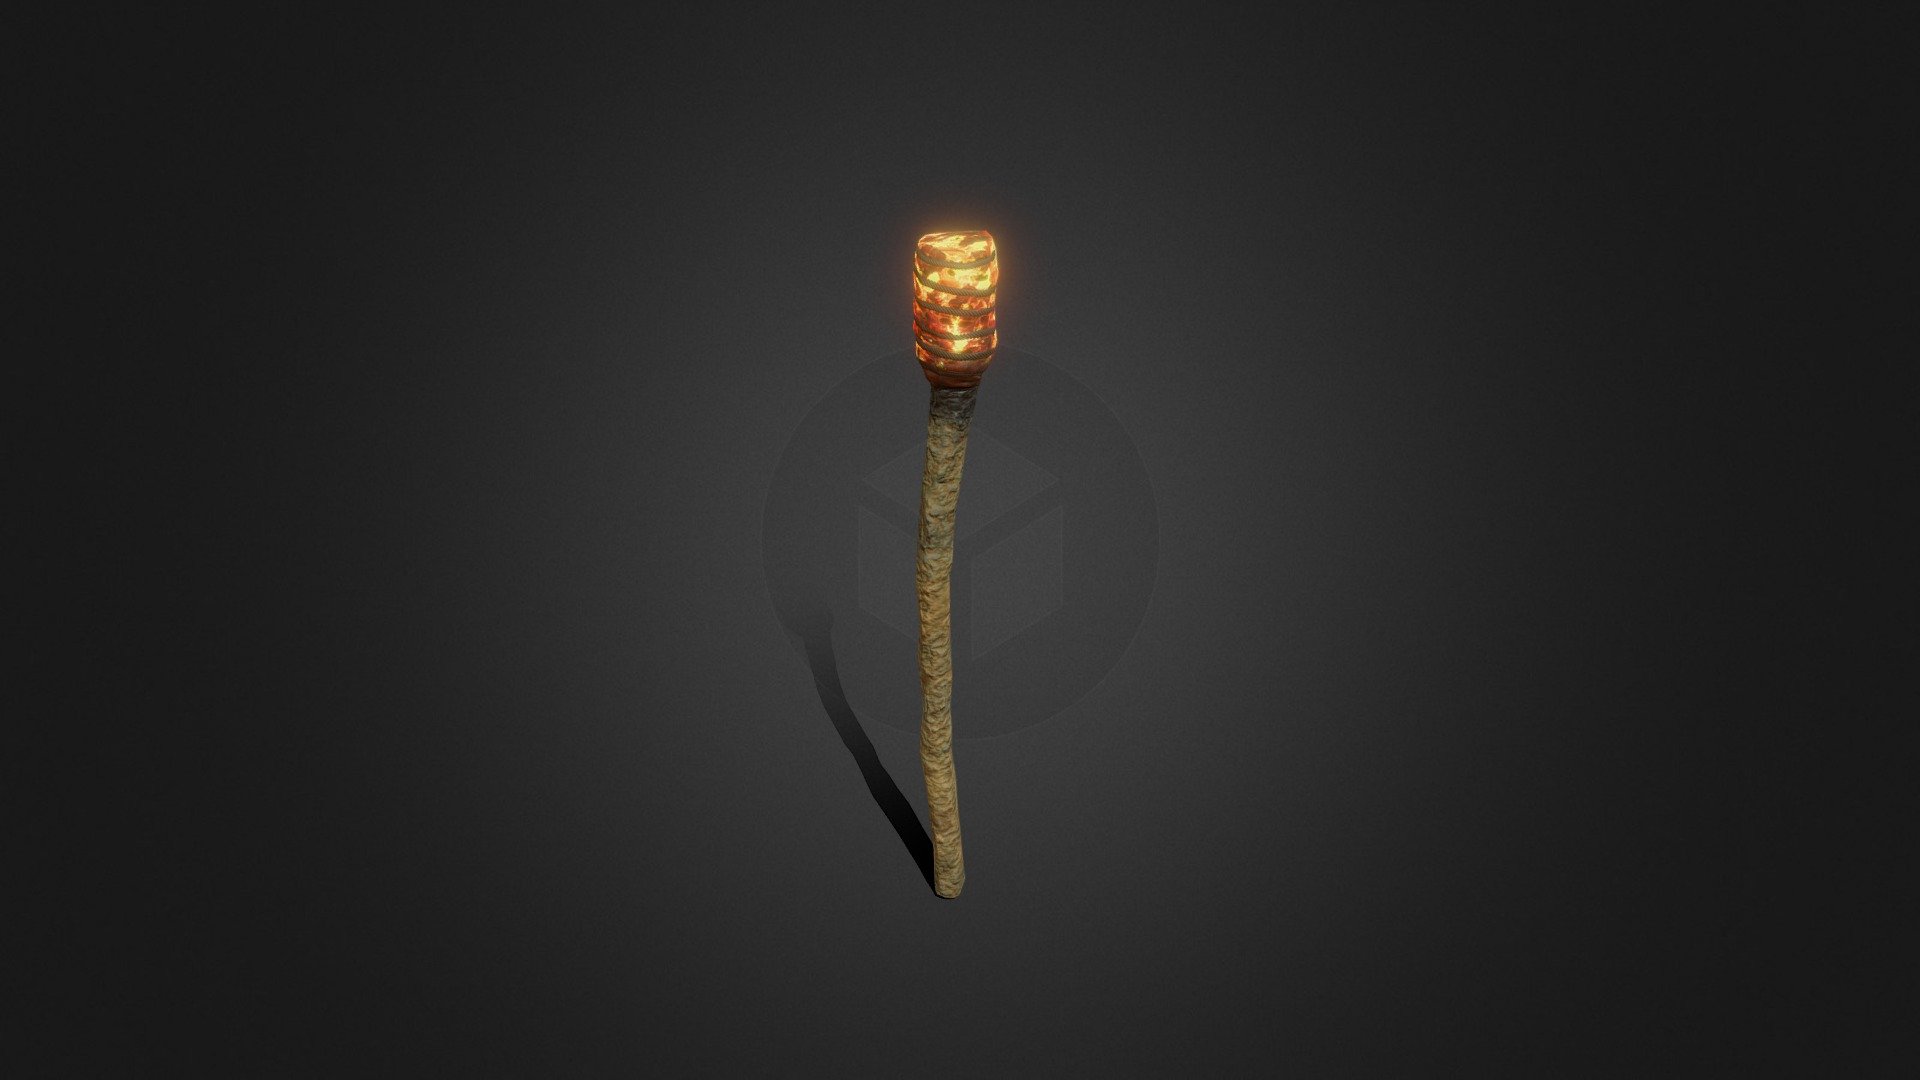 low poly wooden torch

2k maps - Torch stick - Download Free 3D model by DJMaesen (@bumstrum) 3d model